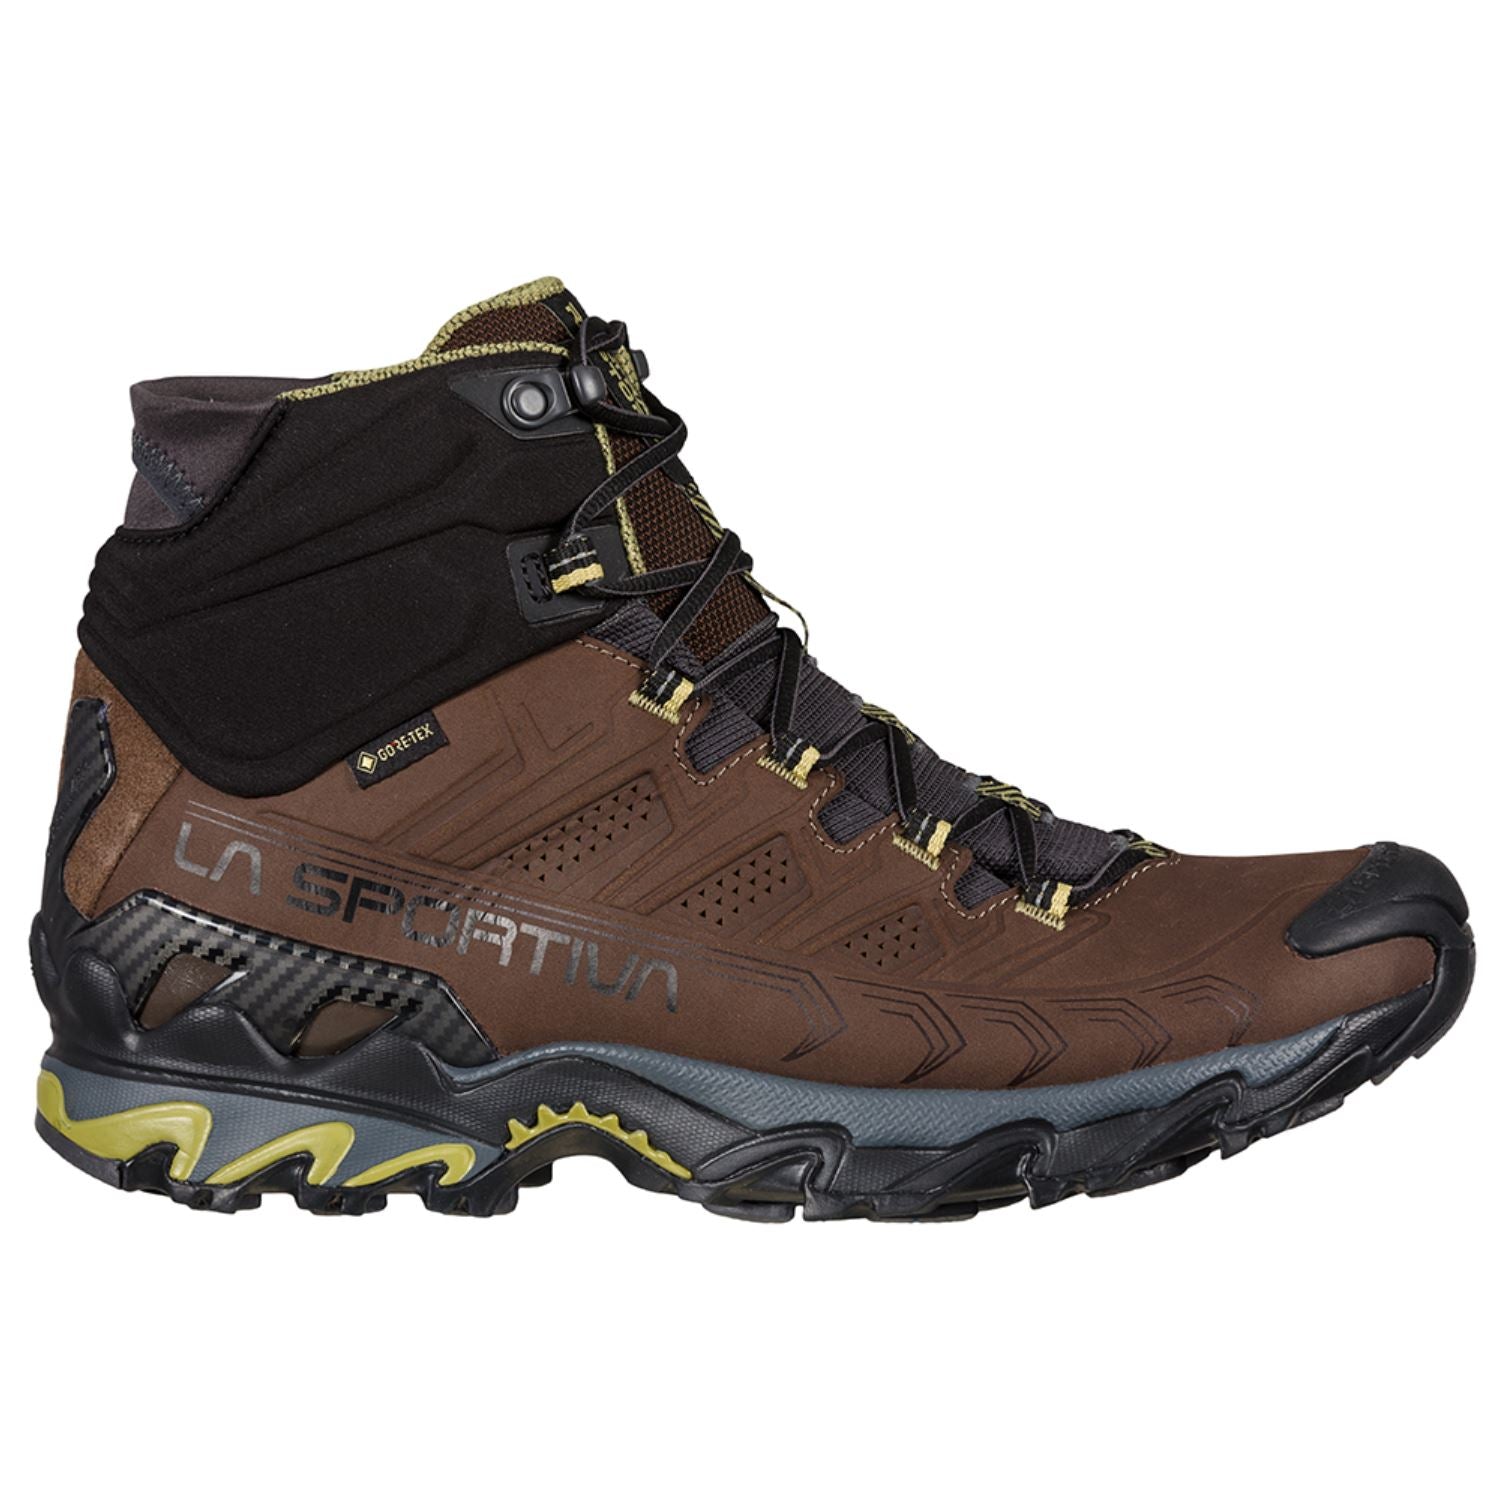 a side view of the la sportiva mens ultra raptor 2 mid leather goretex boot in chocolate/cedar